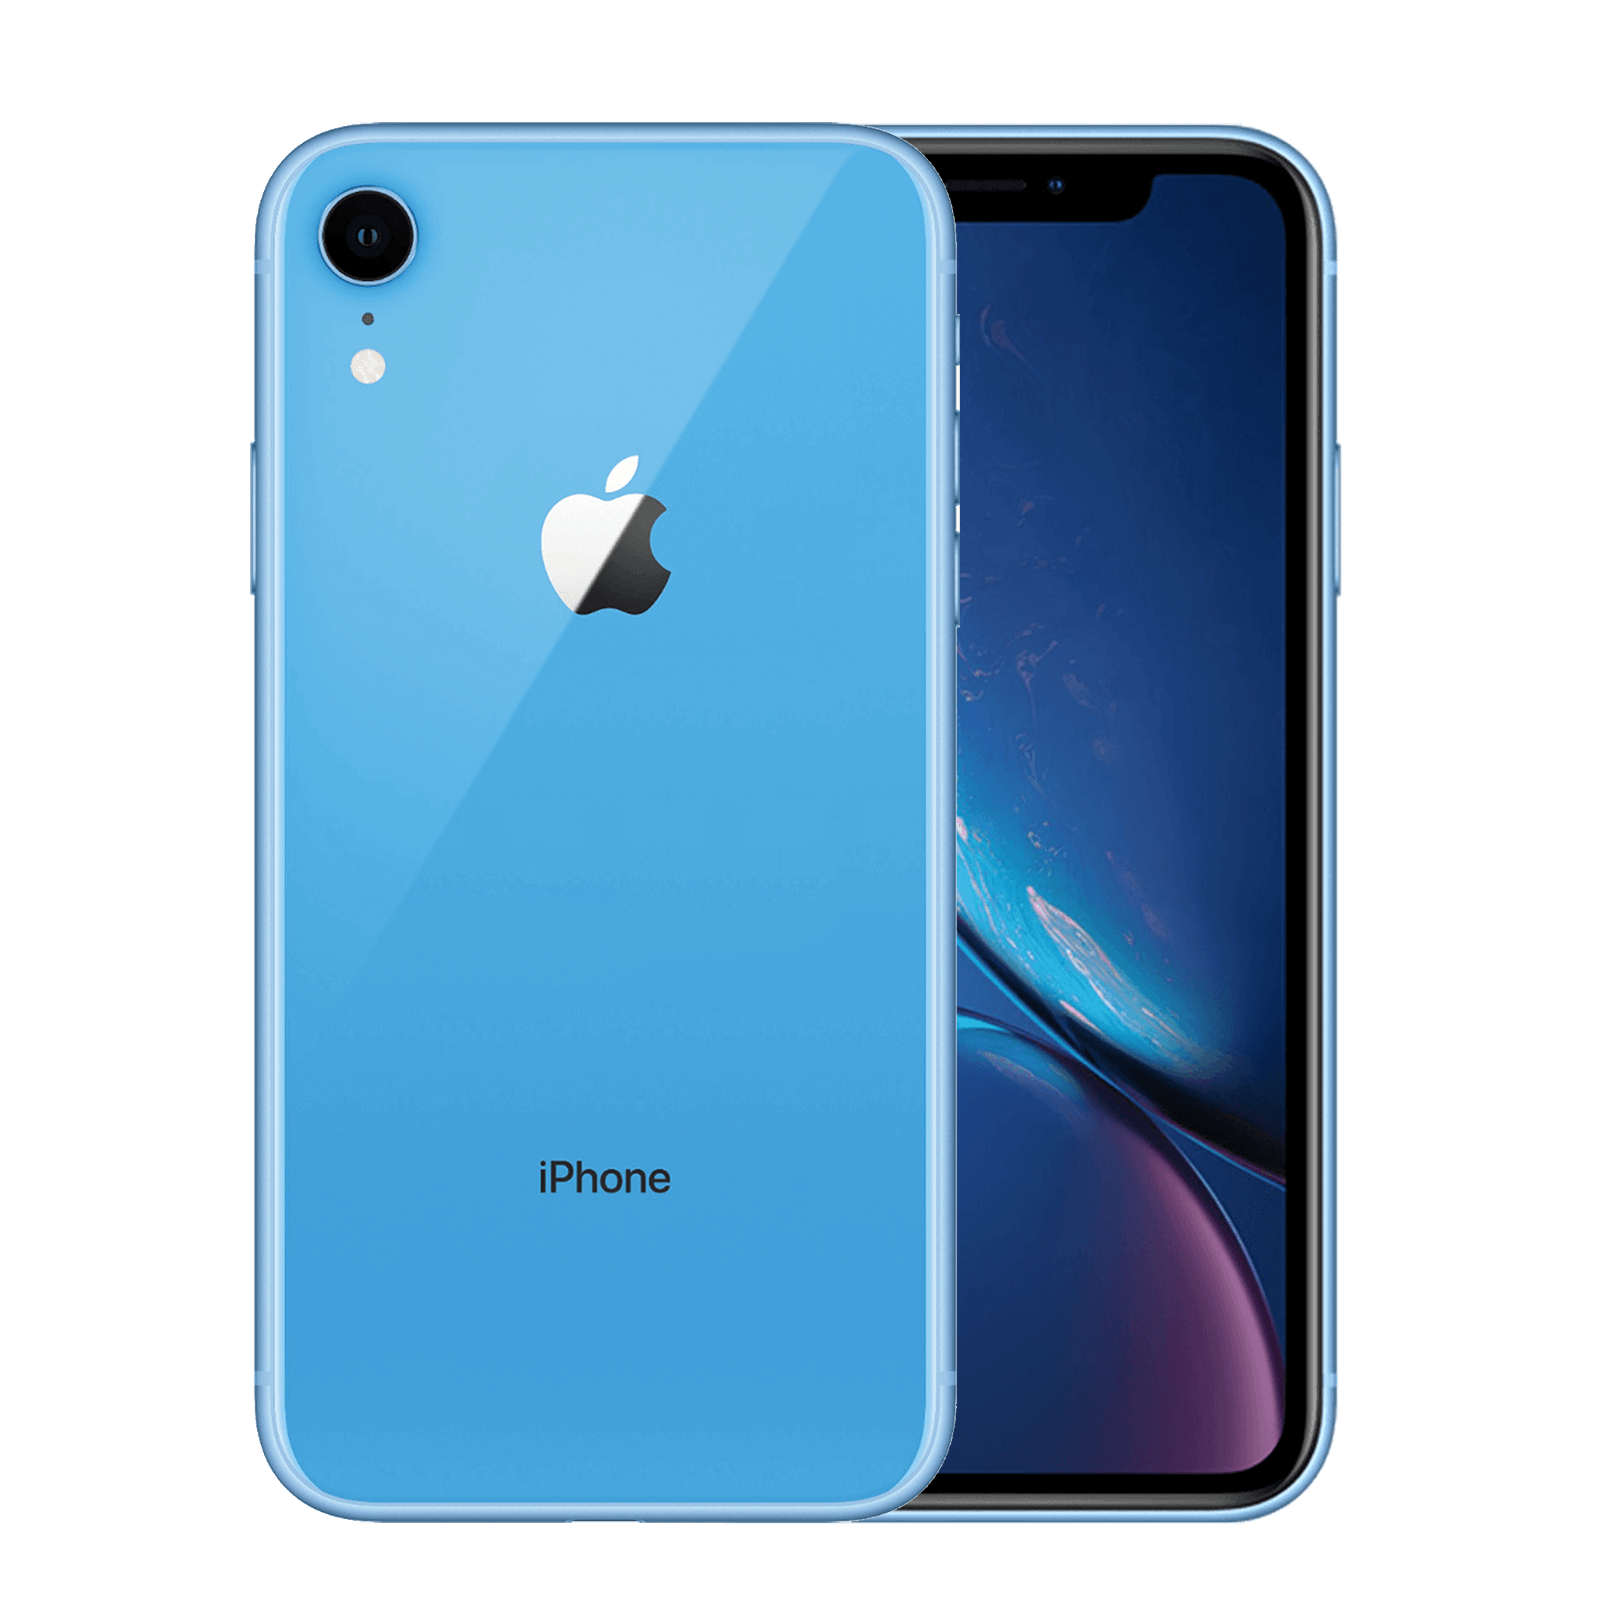 Apple iPhone XR 128GB Blue Very Good - T-Mobile